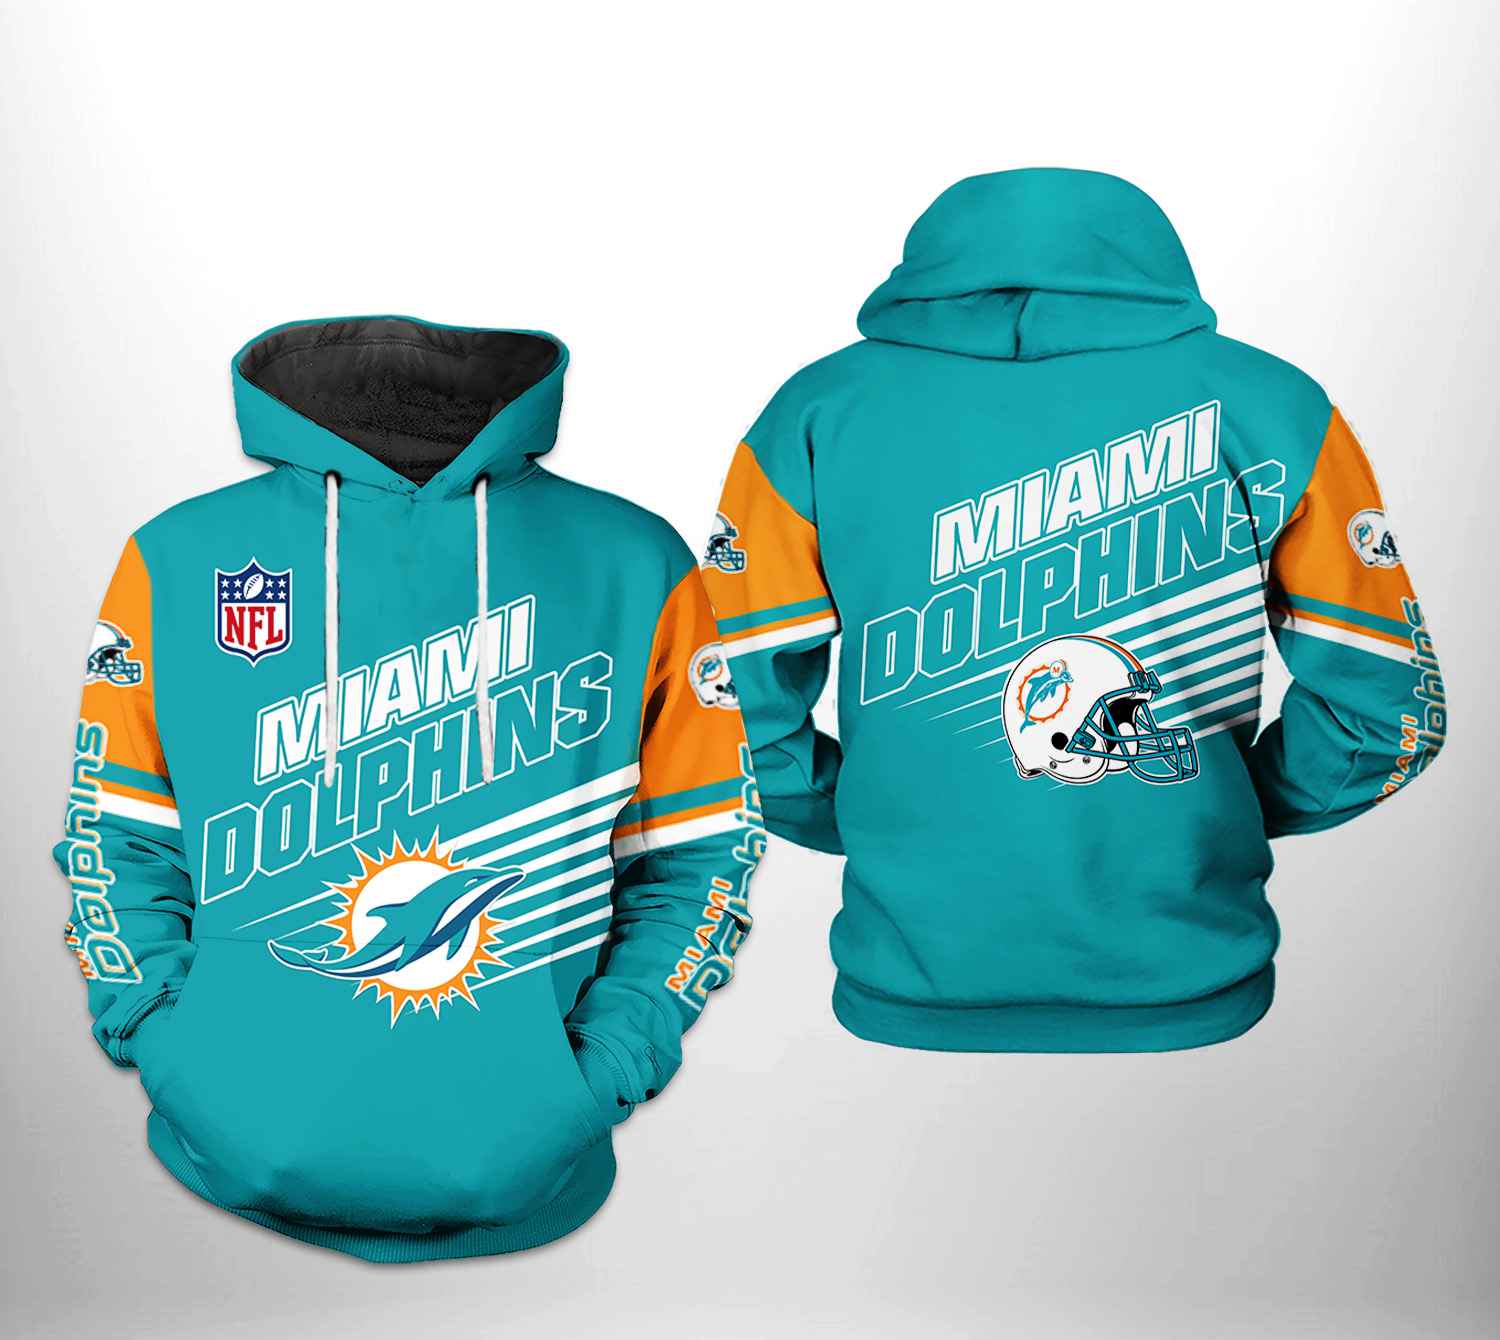 Miami Dolphins Shop - Miami Dolphins NFL Team 3D Printed HoodieZipper Hoodie